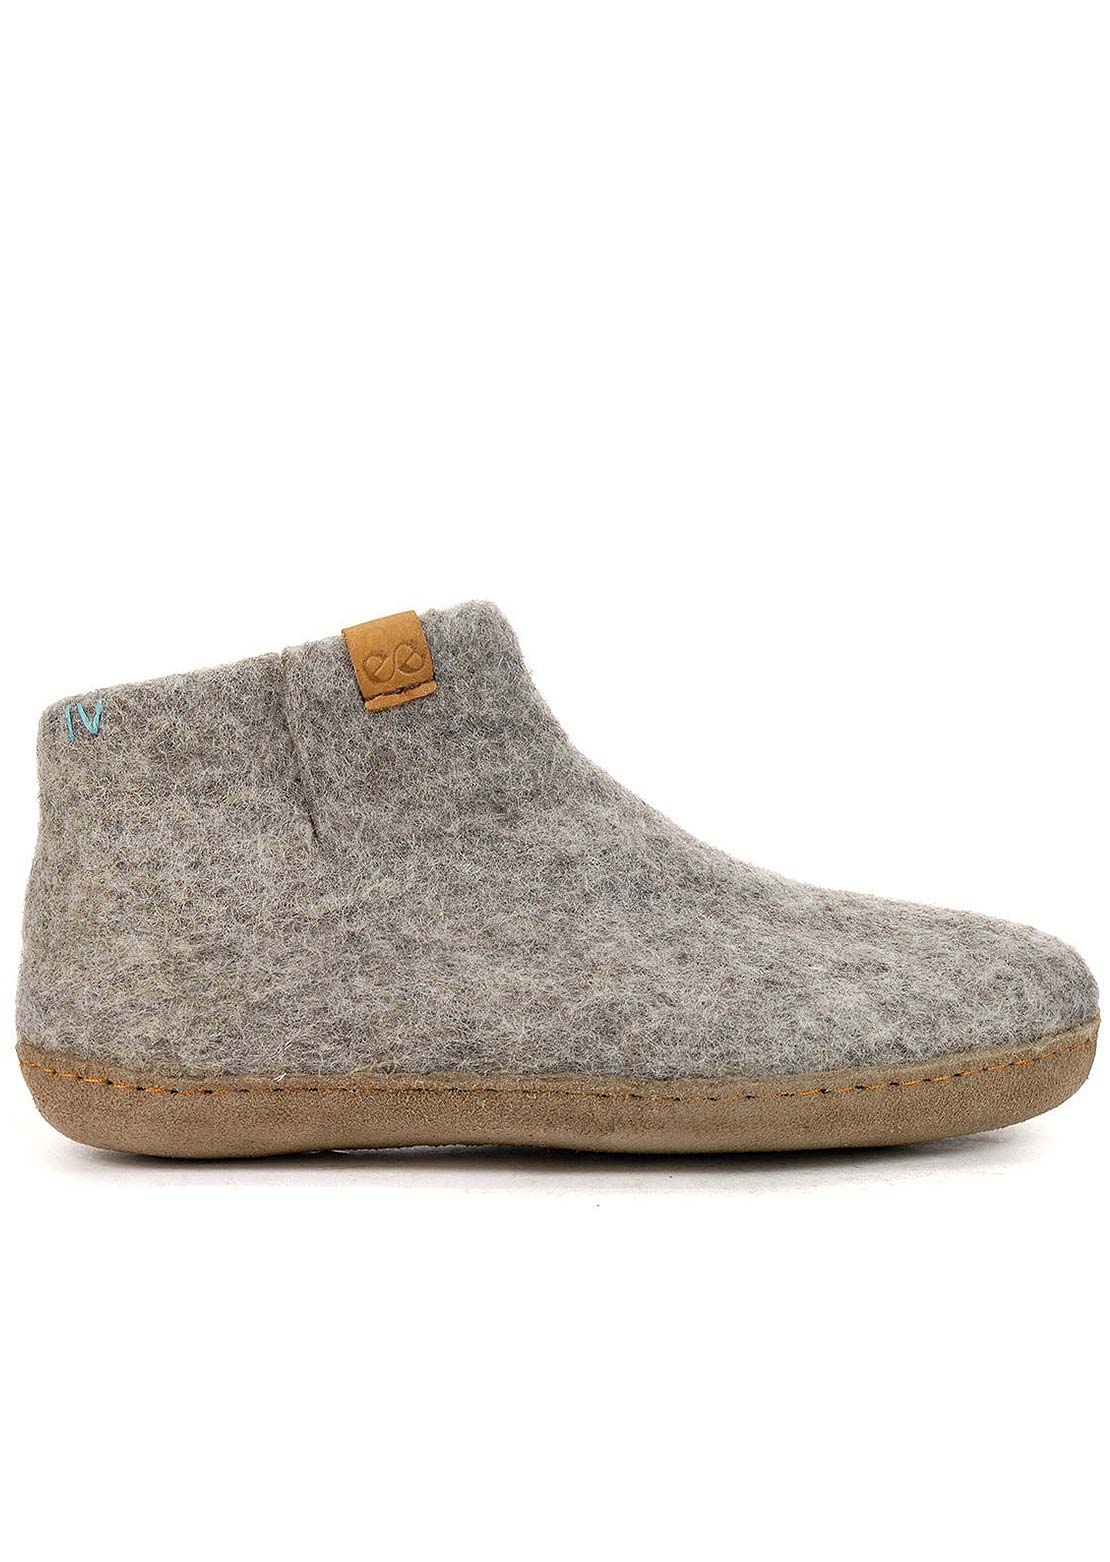 Wool by Green Unisex Everest Suede Sole Shoes Light Grey